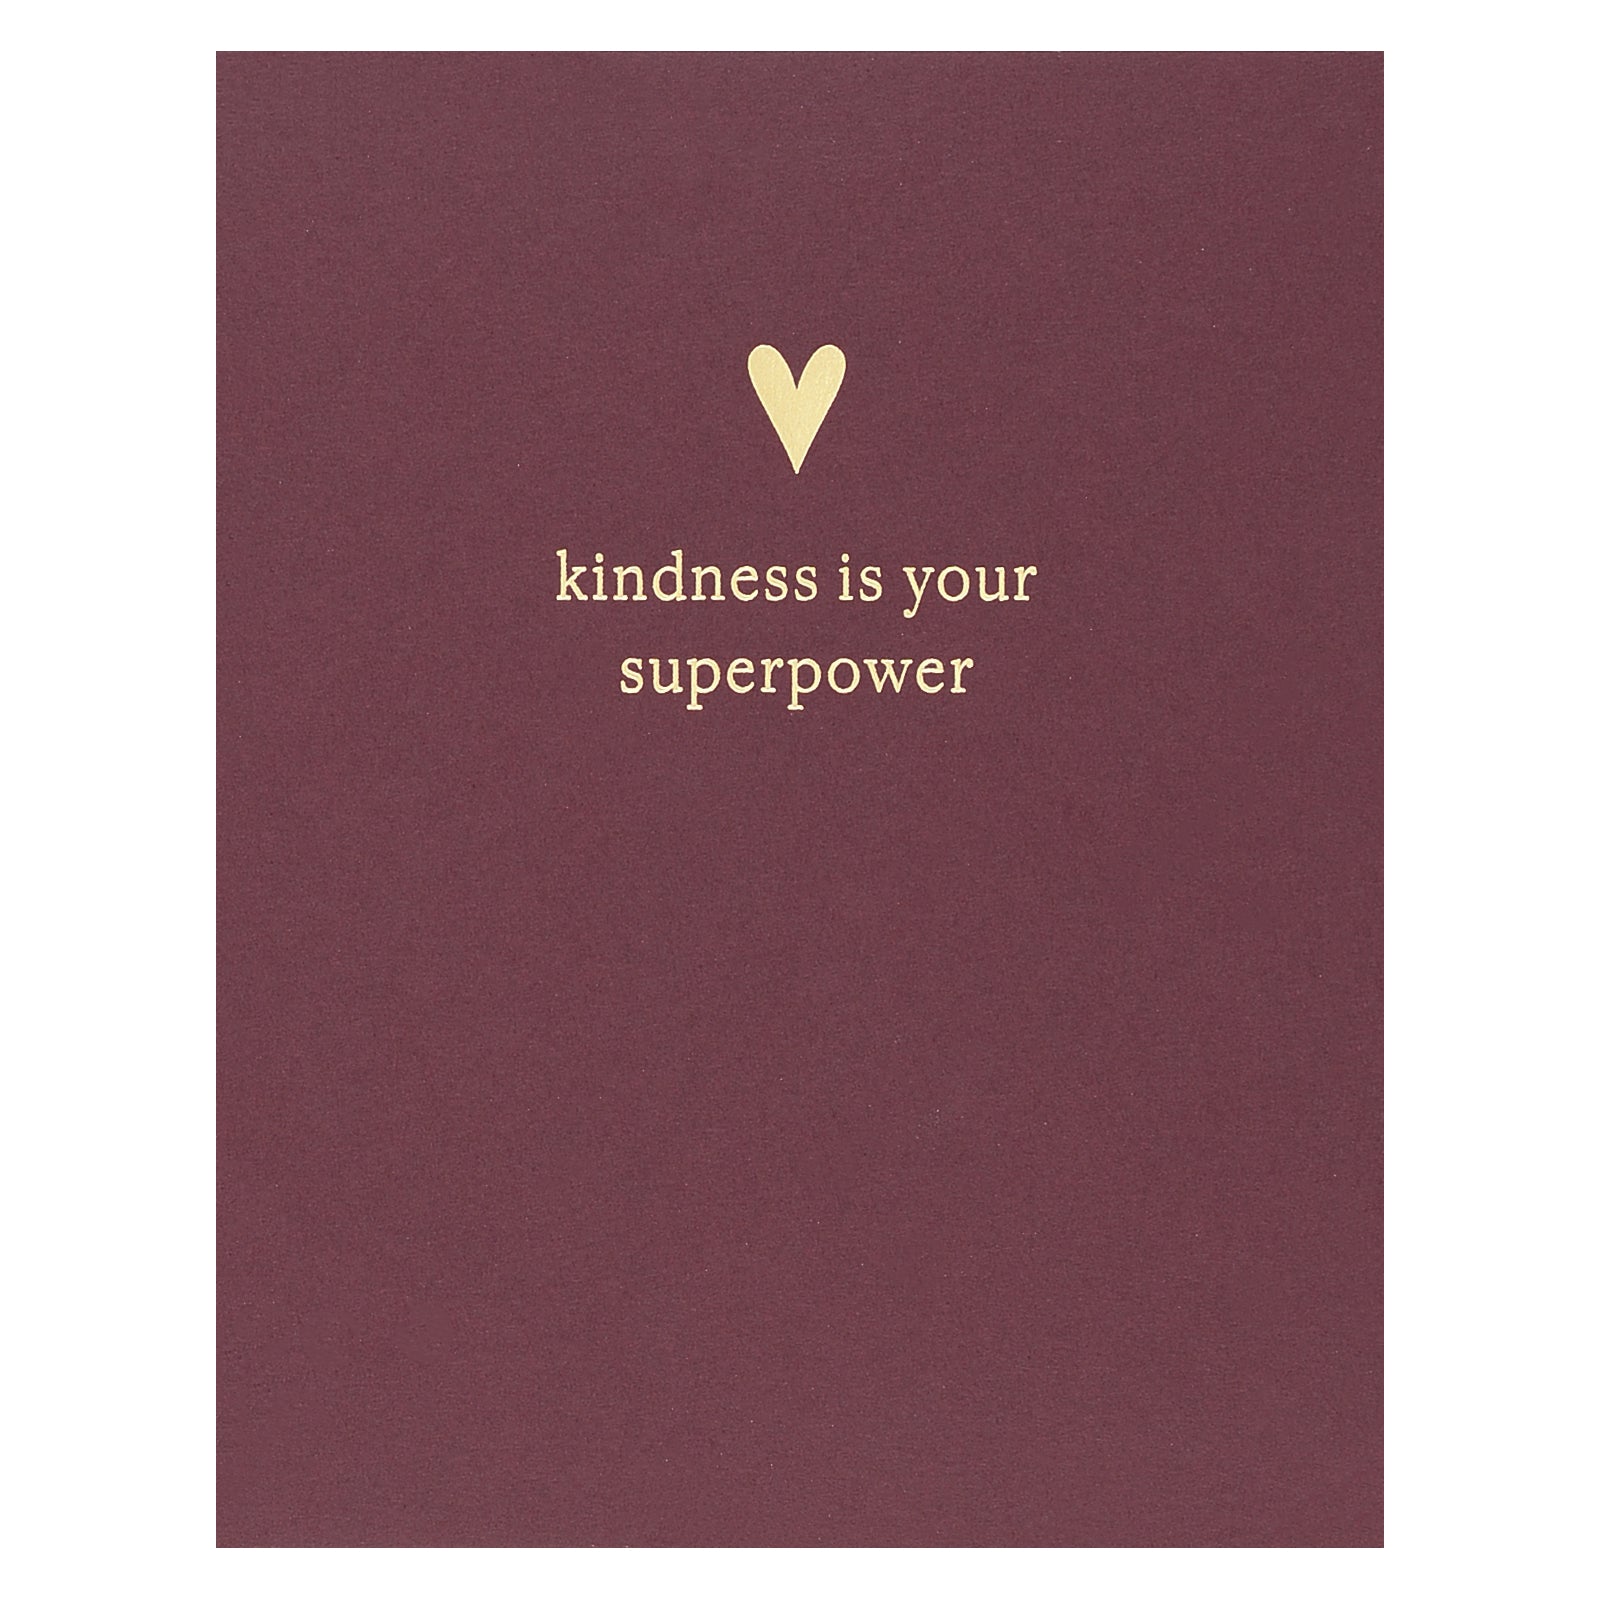 Smitten on Paper Kindness Superpower Greeting Card 